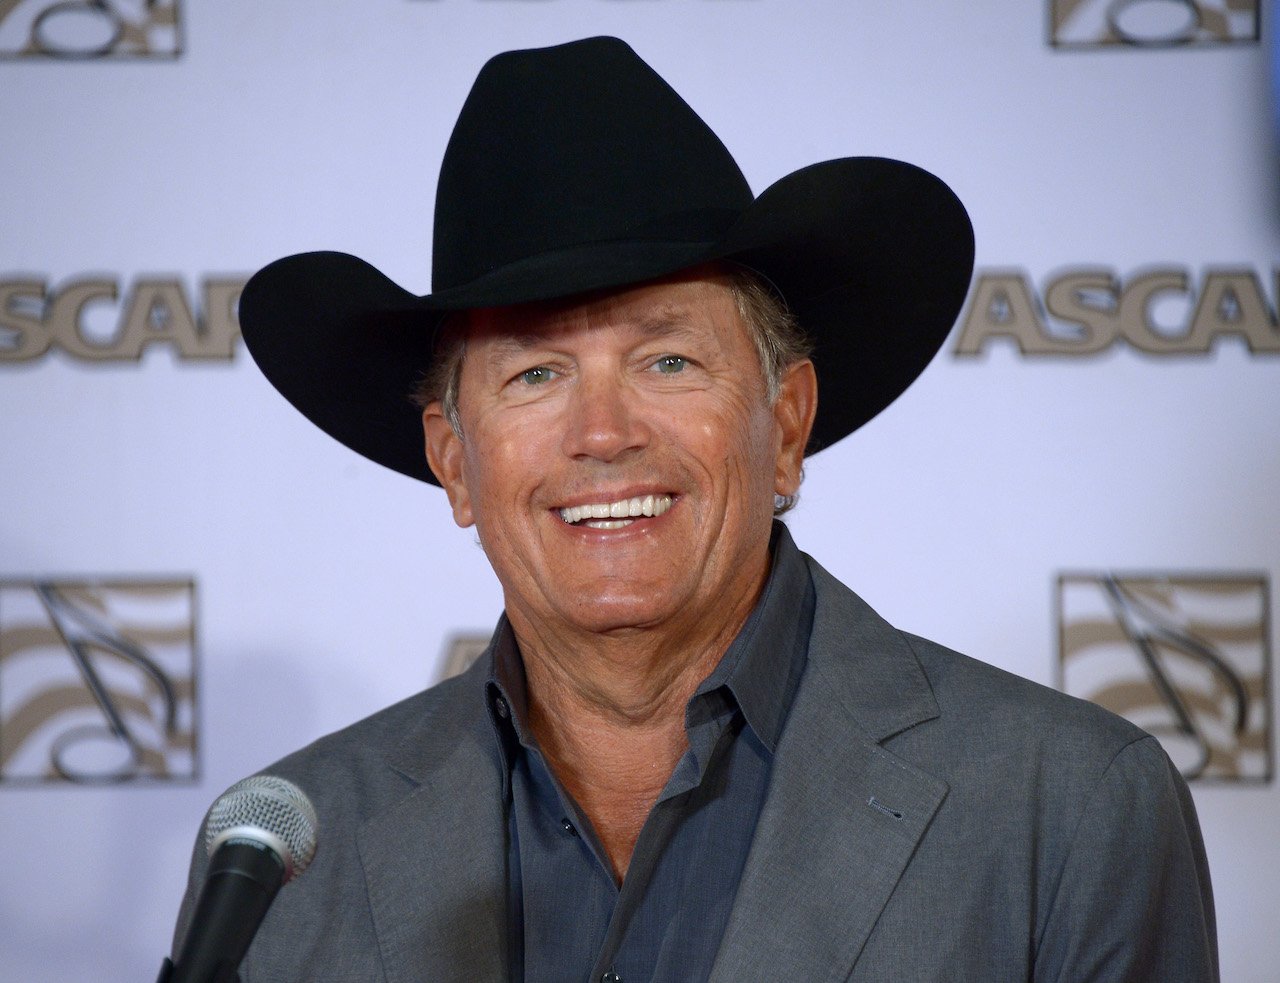 George Strait, who said he hopes for a career like George Jones, attends the 51st annual ASCAP Country Music Awards at Music City Center on November 4, 2013, in Nashville, Tennessee.